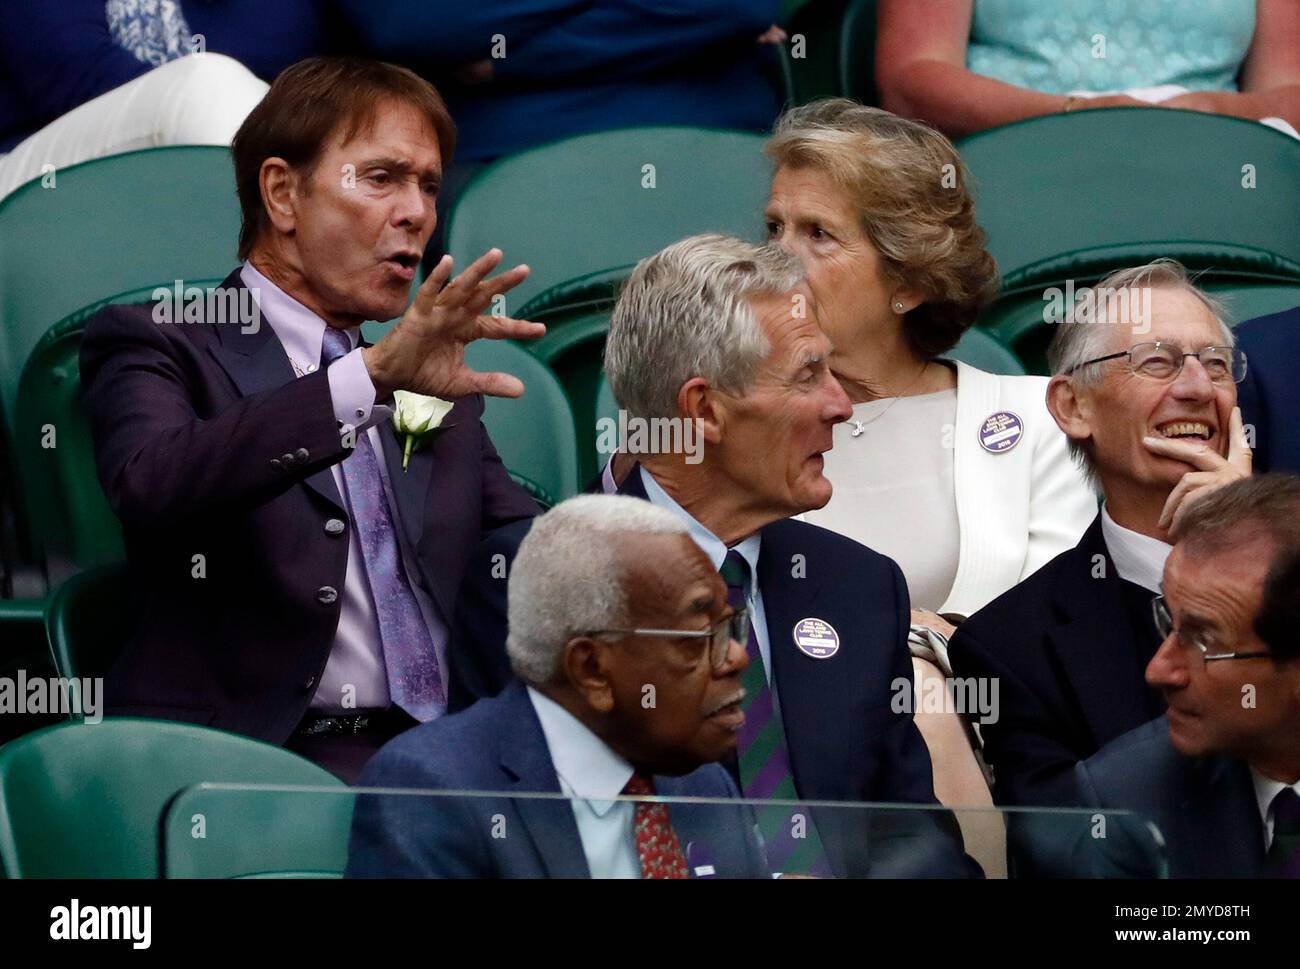 Singer Sir Cliff Richard, left, and former news reader Sir Trevor McDonald, front centre, sit in the Royal Box during day five of the Wimbledon Tennis Championships in London, Friday, July 1, 2016. (AP Photo/Ben Curtis) Stock Photo